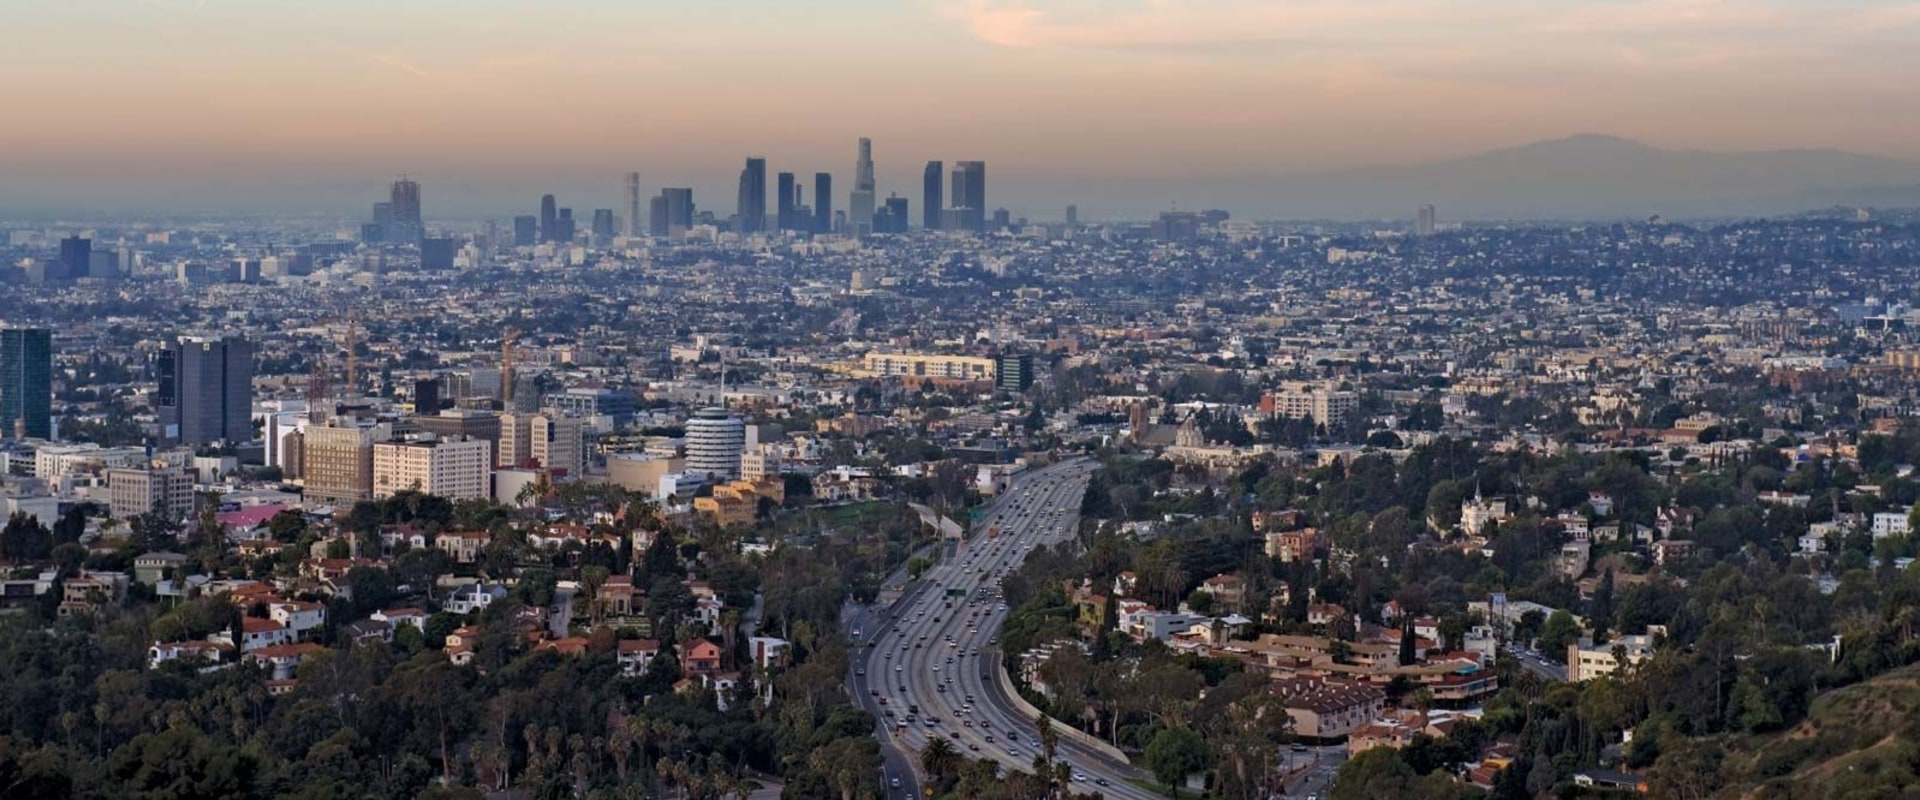 Why los angeles called city of angels?